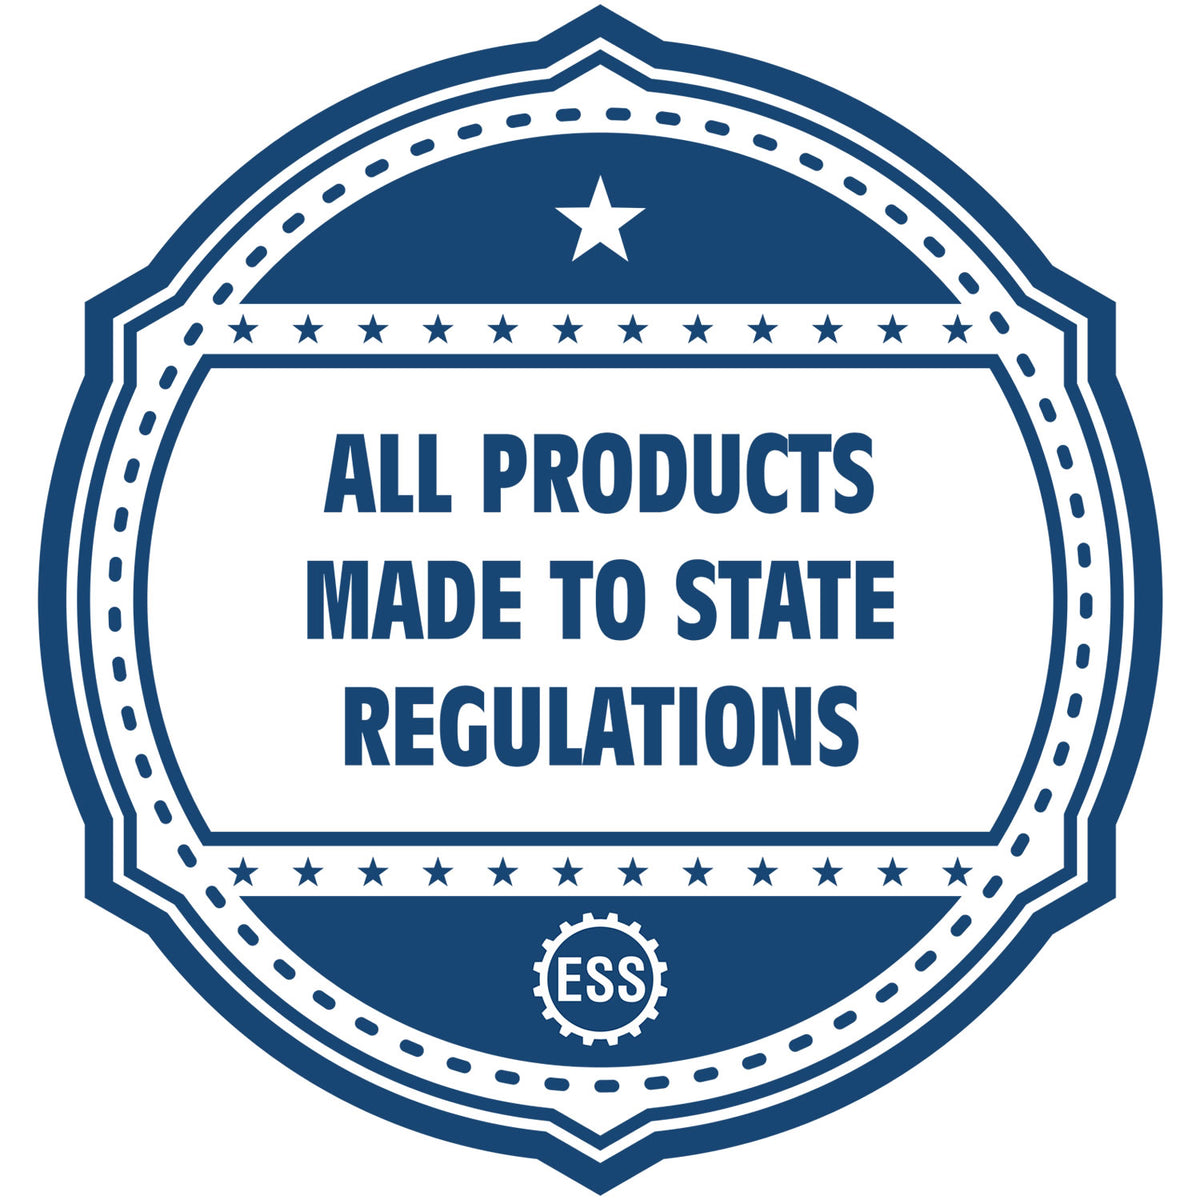 An icon or badge element for the Digital Guam Landscape Architect Stamp showing that this product is made in compliance with state regulations.